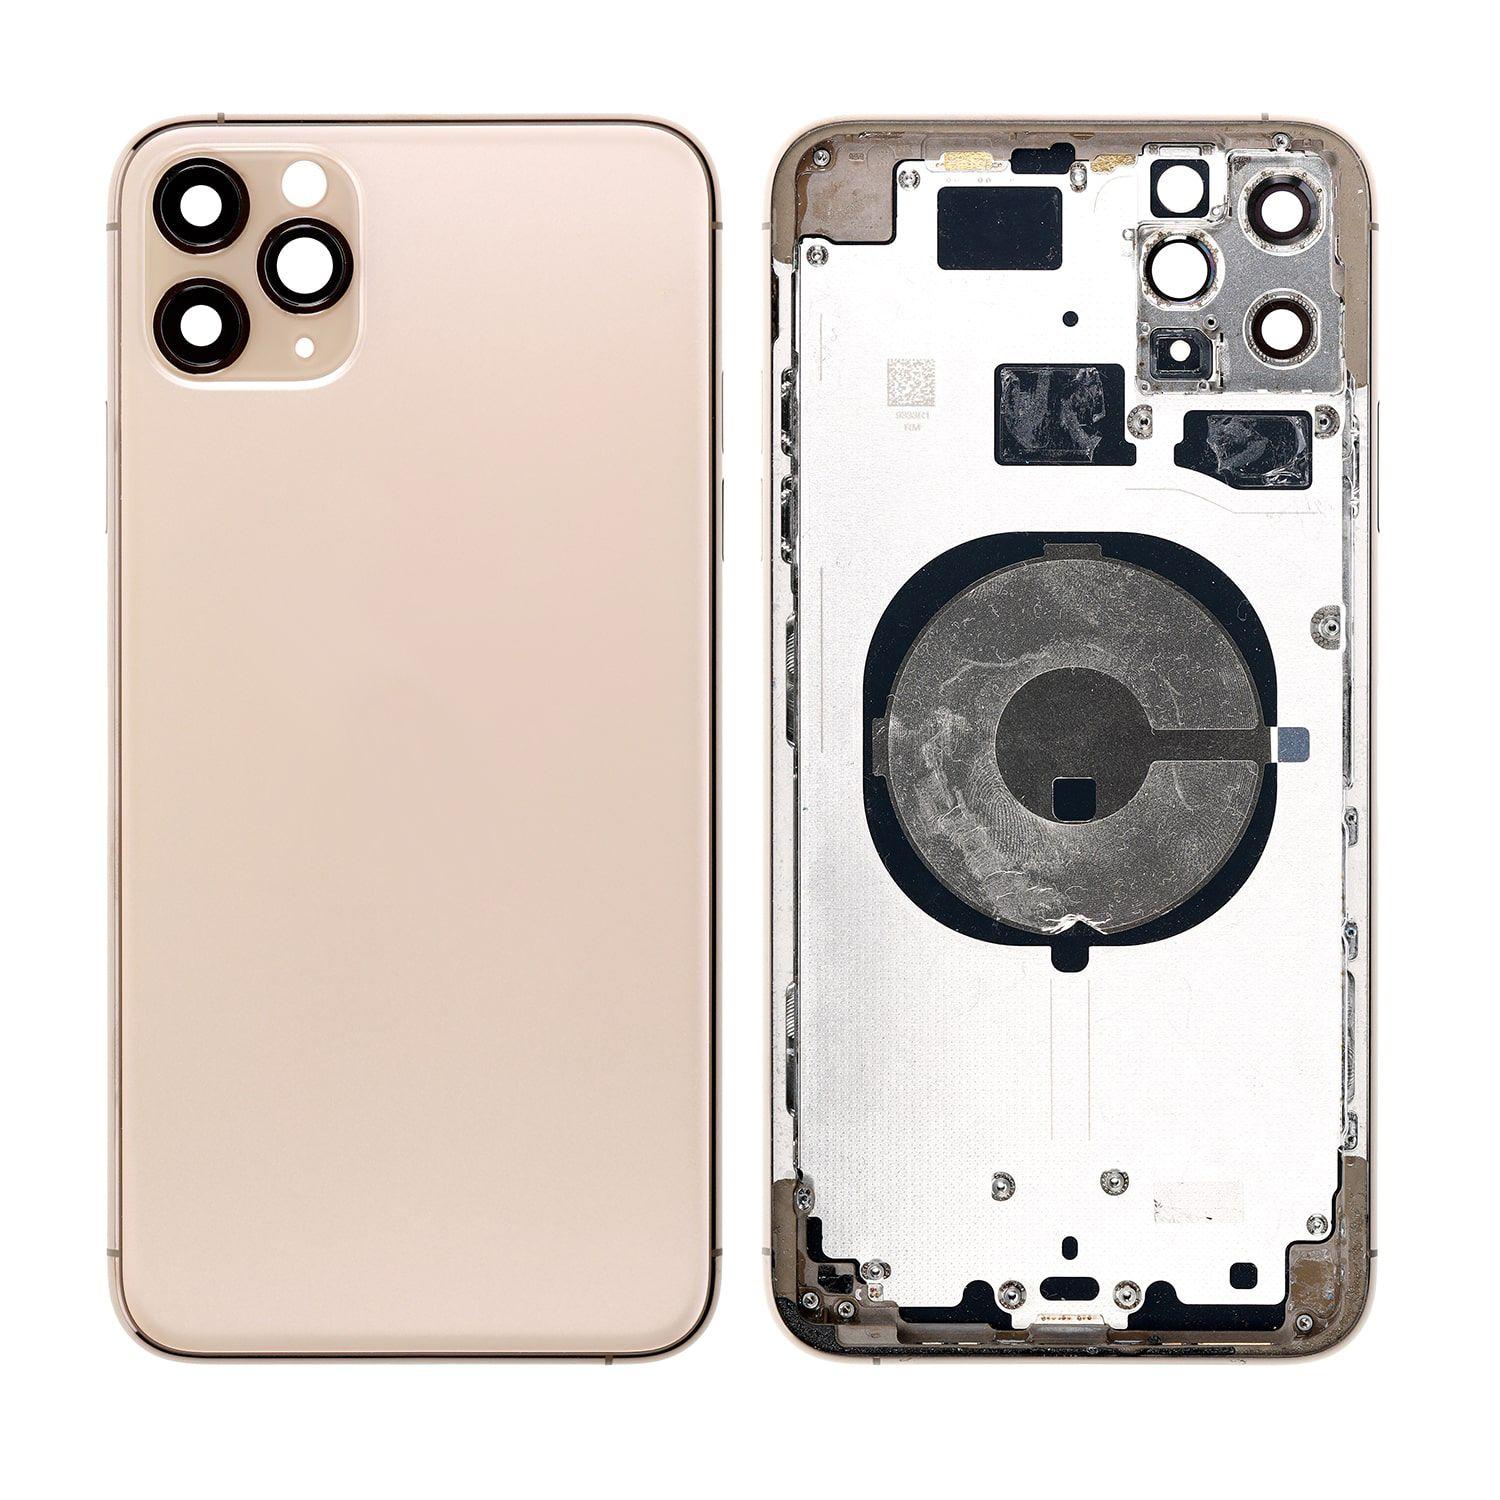 Body for iPhone 11 Pro Max + back cover gold